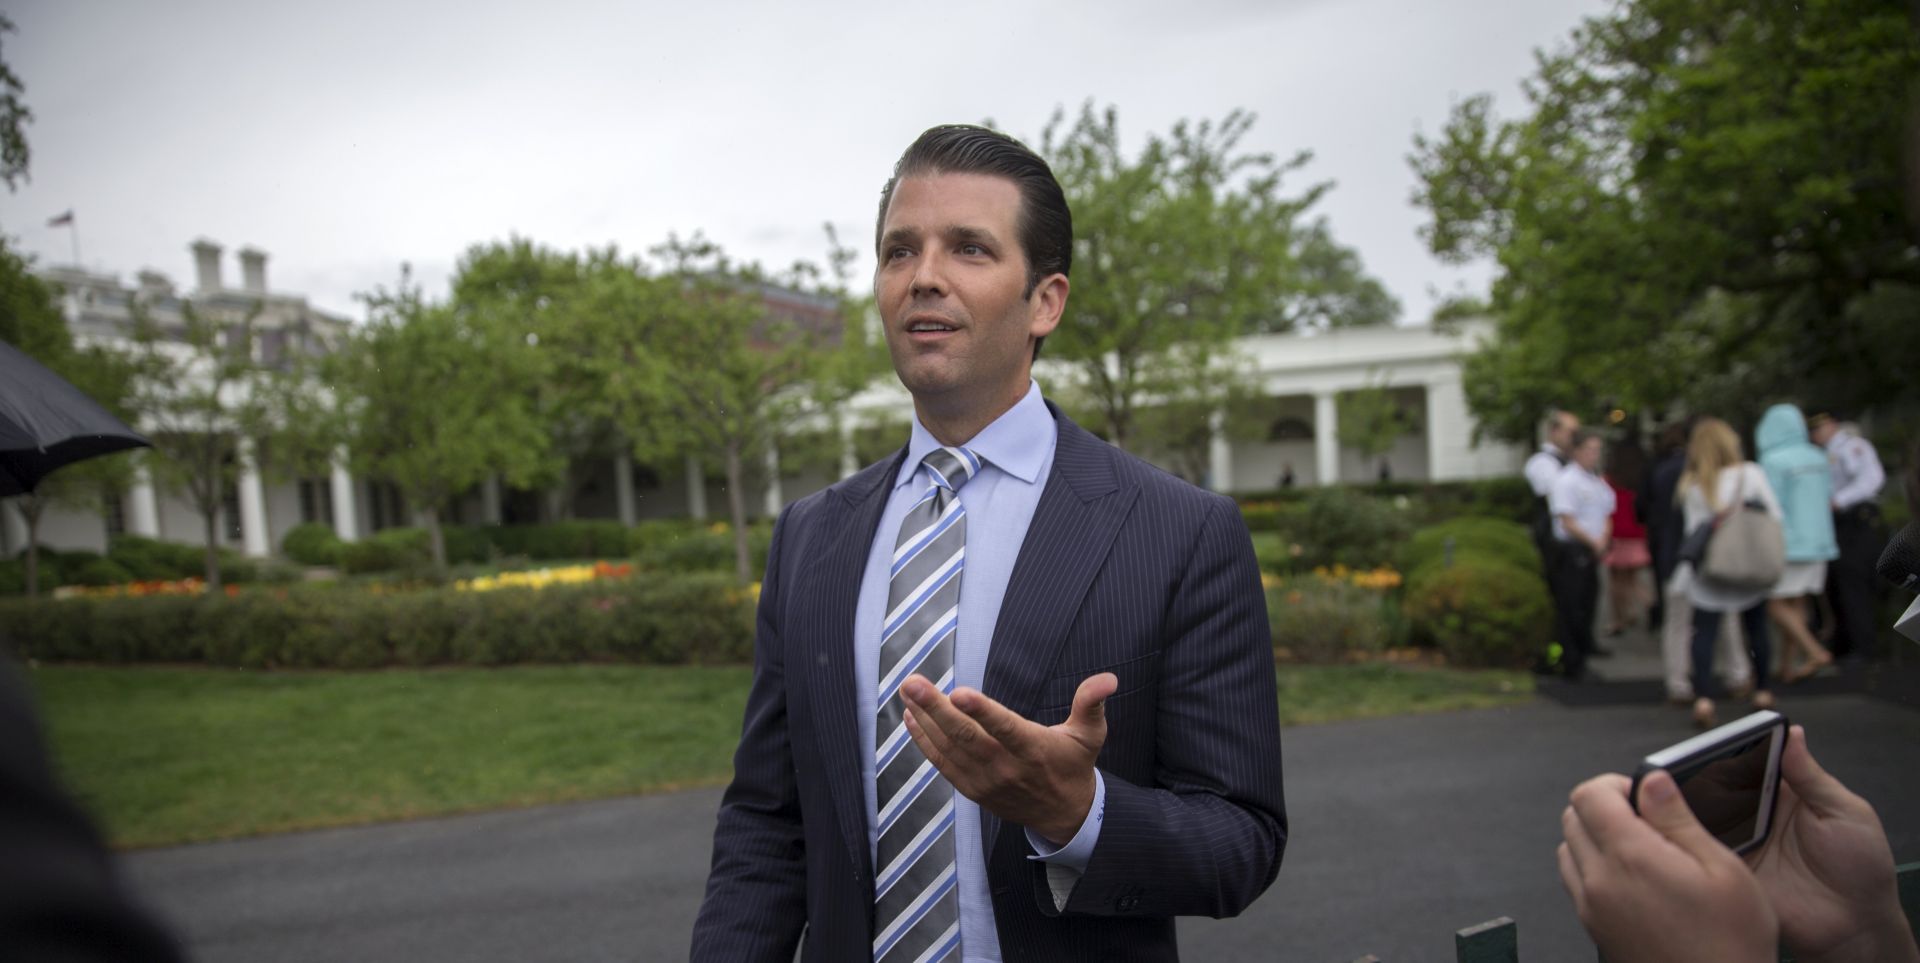 epa06078734 (FILE) - Donald Trump Jr. talks to reporters during the White House Easter Egg Roll on the South Lawn of the White House in Washington, DC, USA, 17 April 2017 (reissued 10 July 2017). According to reports, US President Donald Trump's son, Donald Trump Jr., has admitted that has had allegedly met with a Russian lawyer in 2016.  EPA/SHAWN THEW